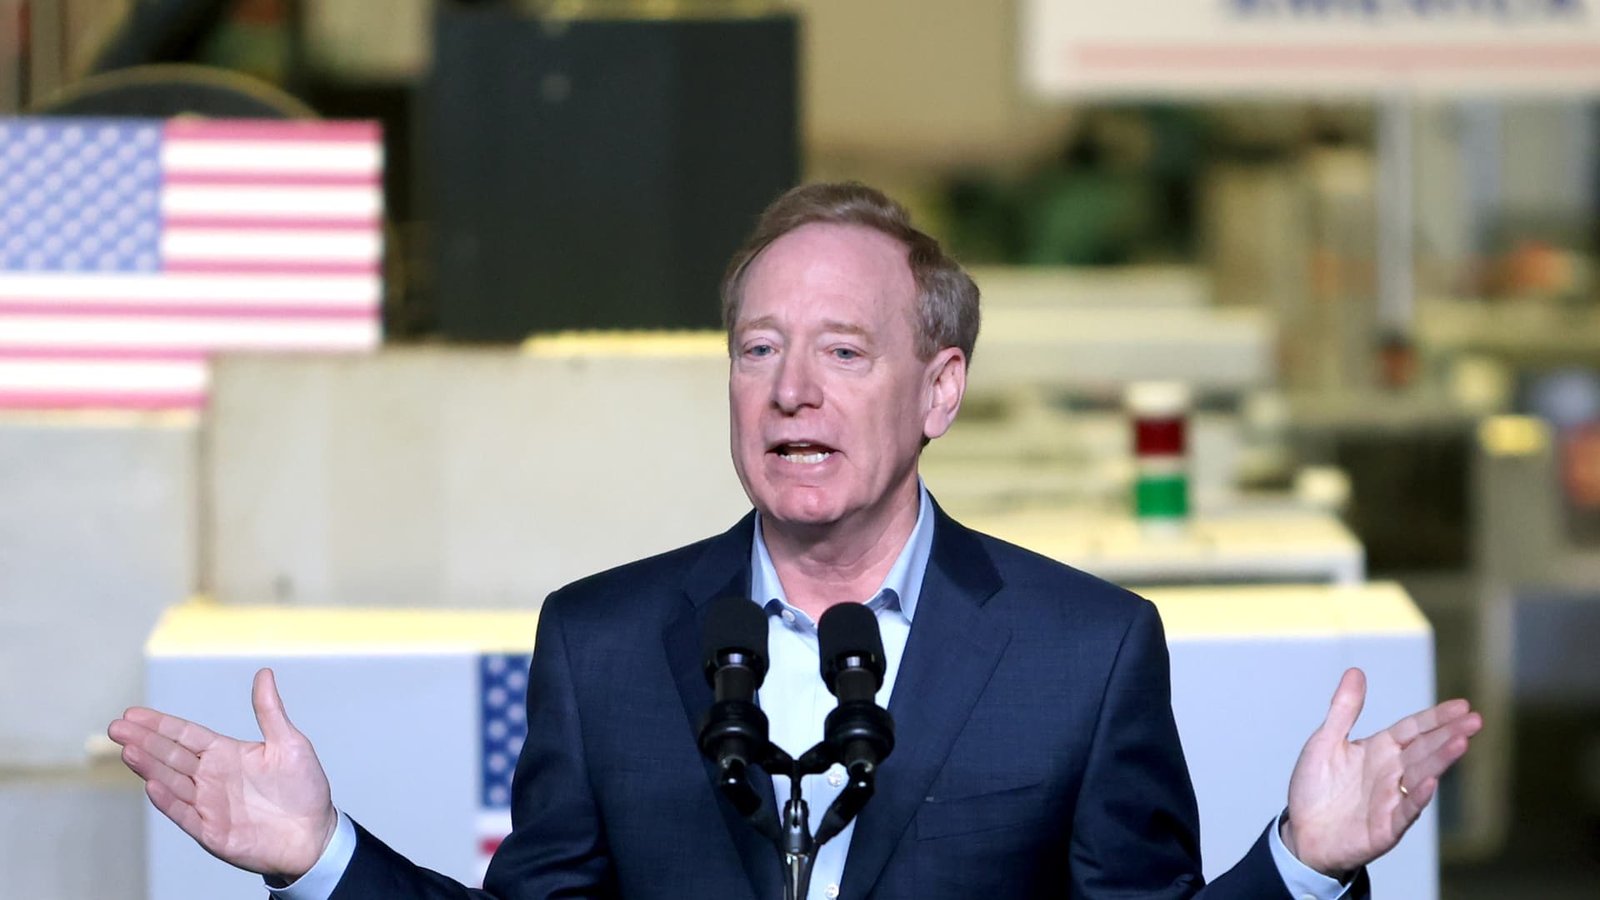 Home committee seeks Microsoft’s Brad Smith for cybersecurity listening to